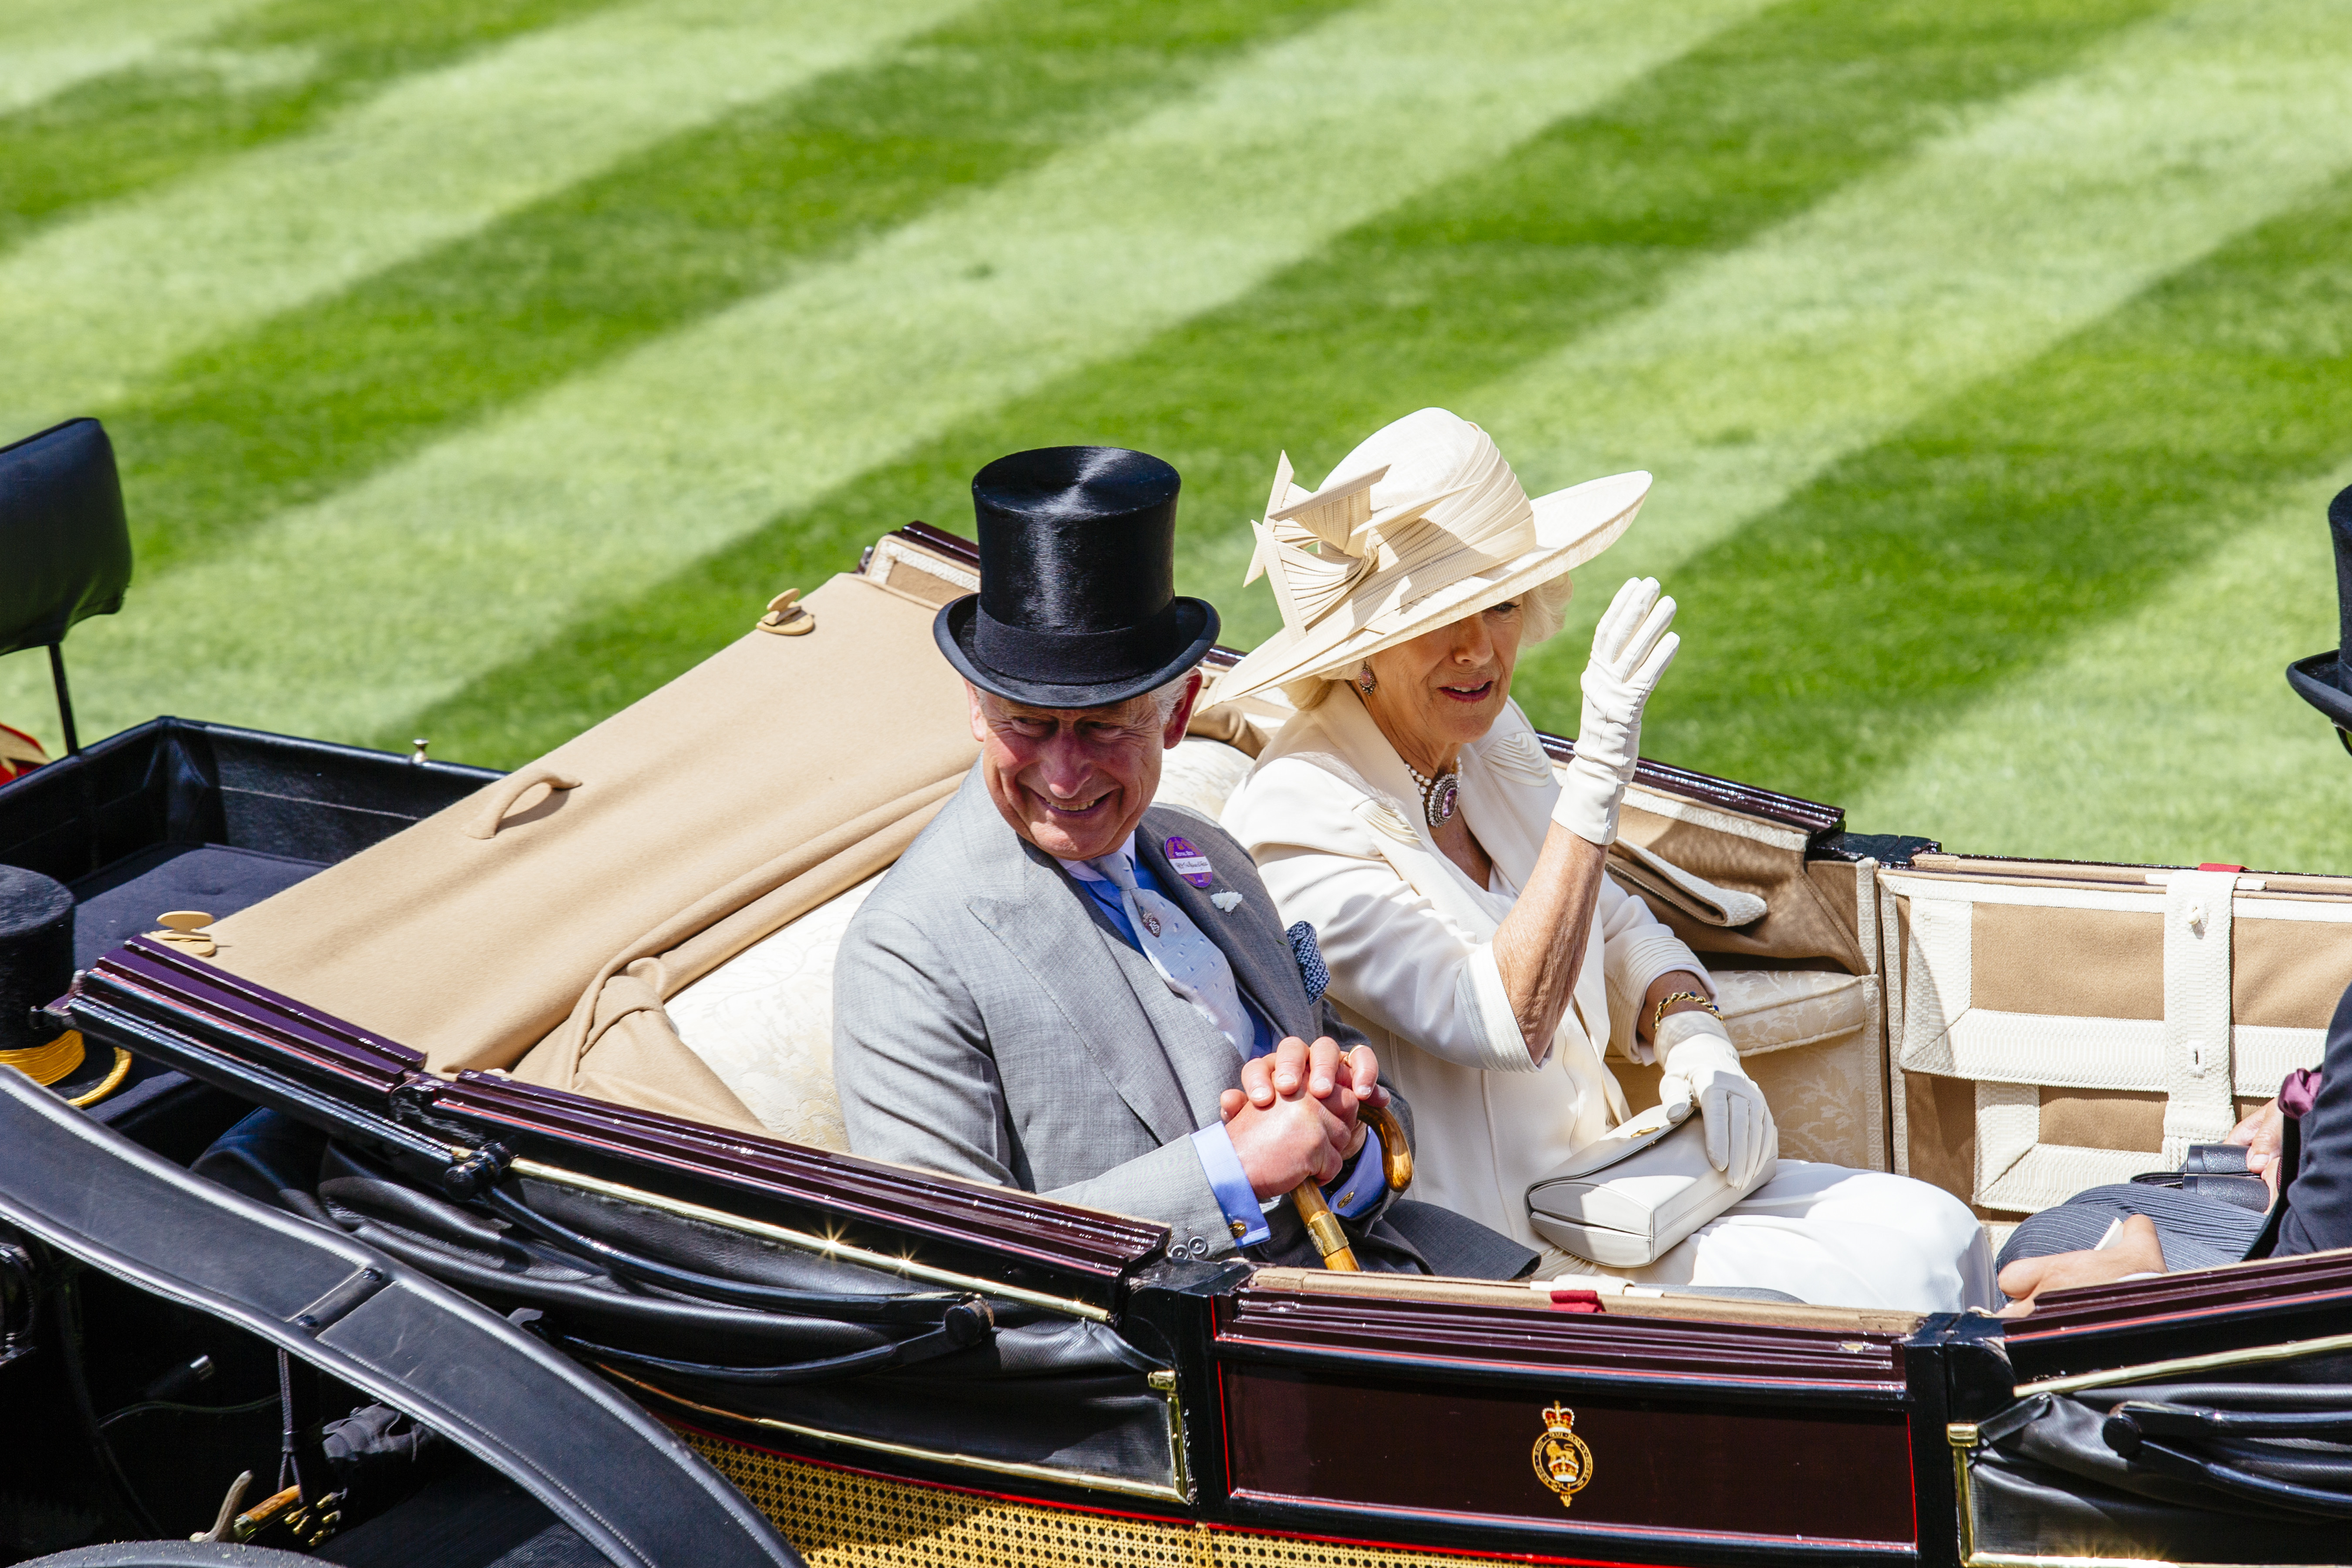 Arrival of Prince Charles and wife in a horse-drawn carriage at Ascot